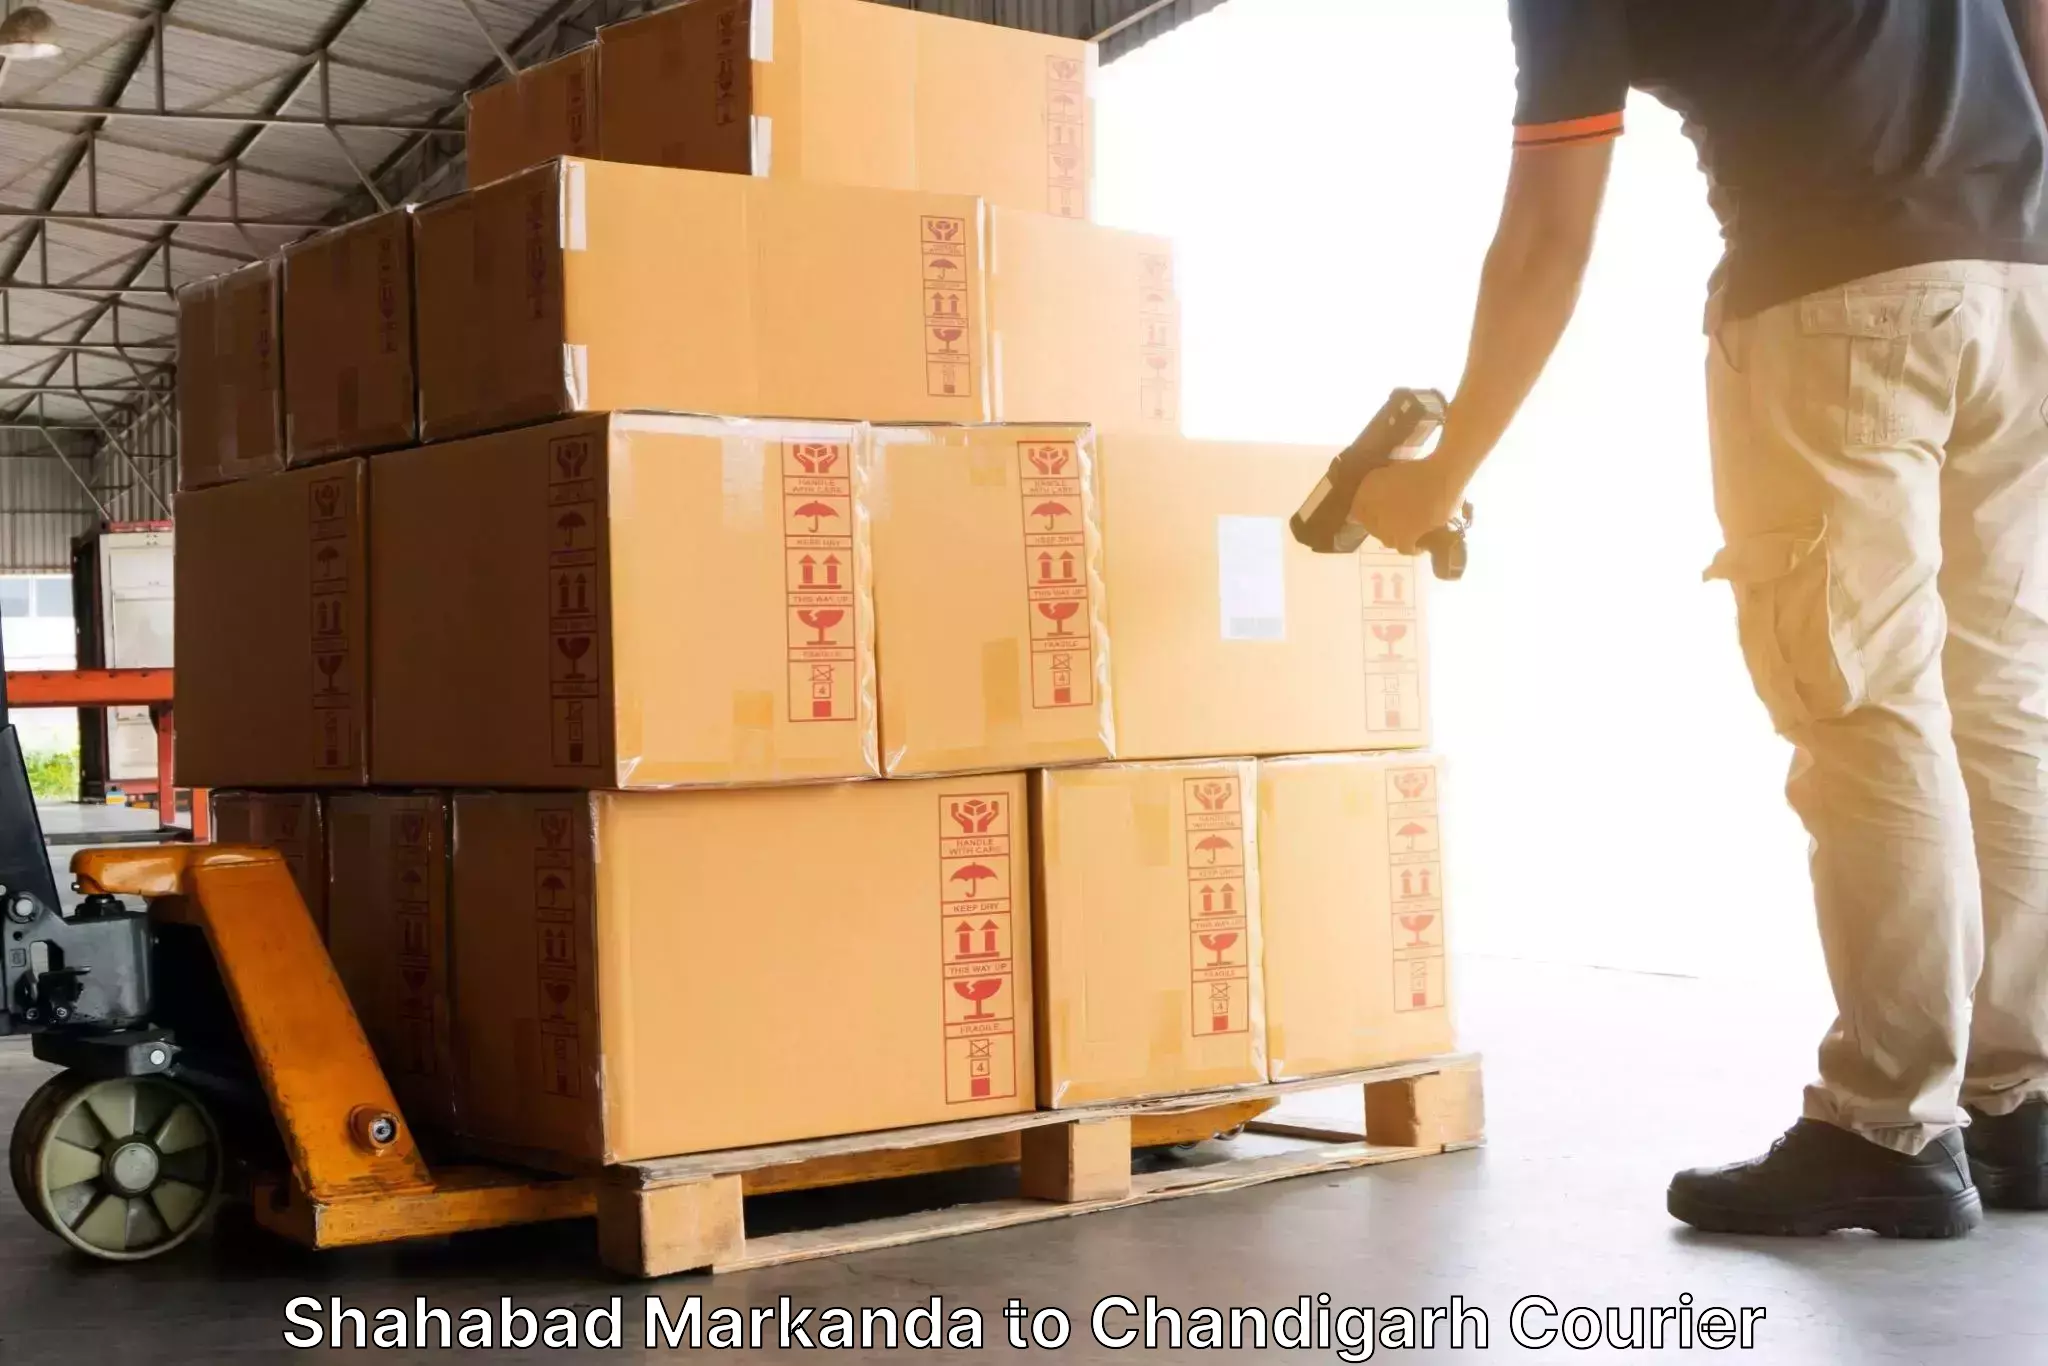 Secure freight services Shahabad Markanda to Chandigarh